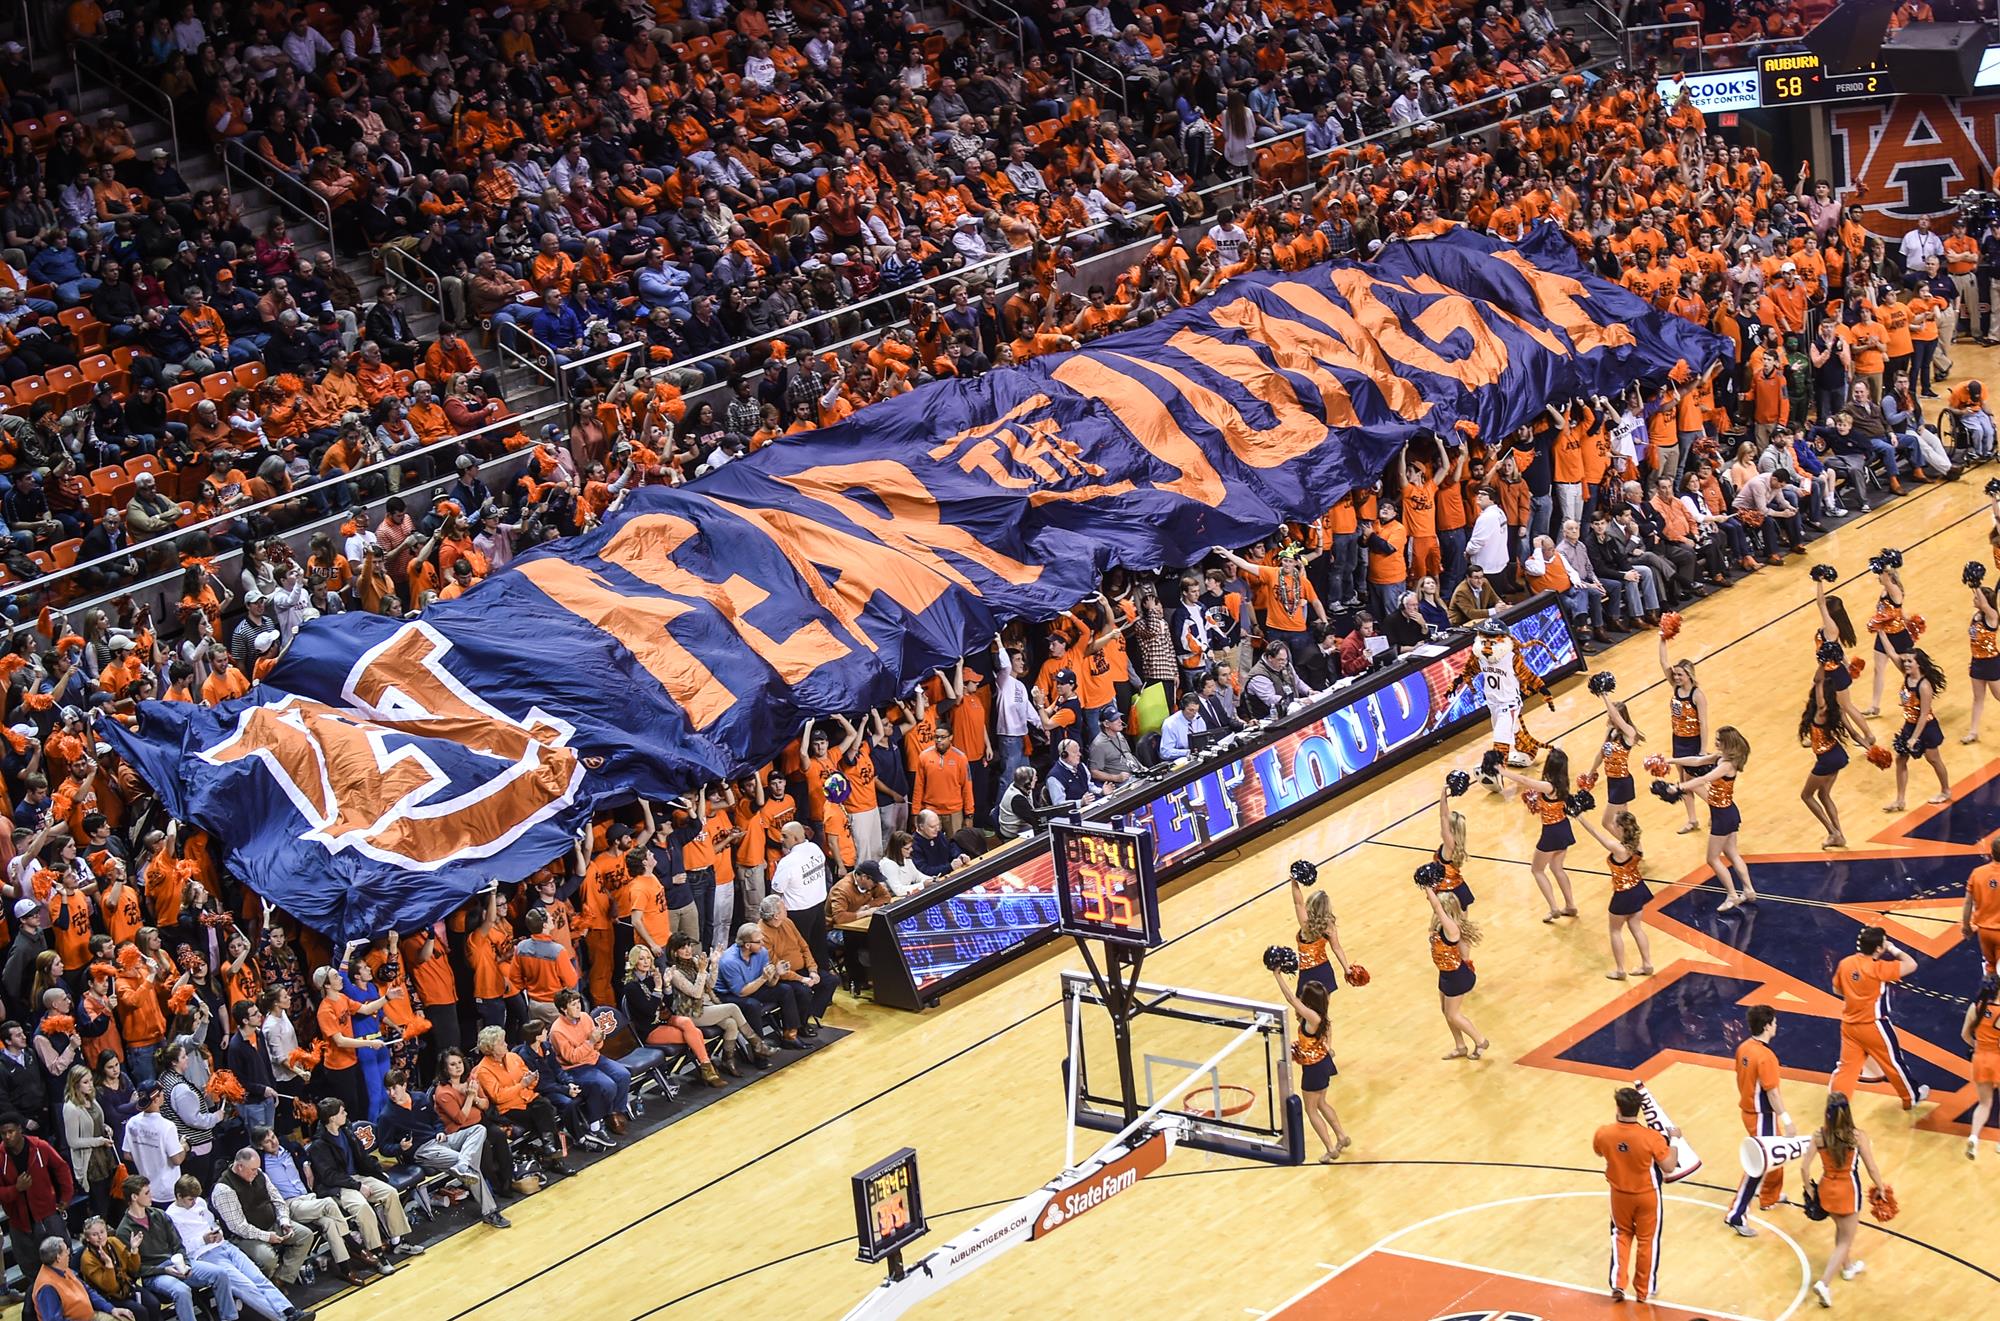 Auburn men's basketball moves up two spots in new AP Top 25 poll, Kentucky moves to No. 1